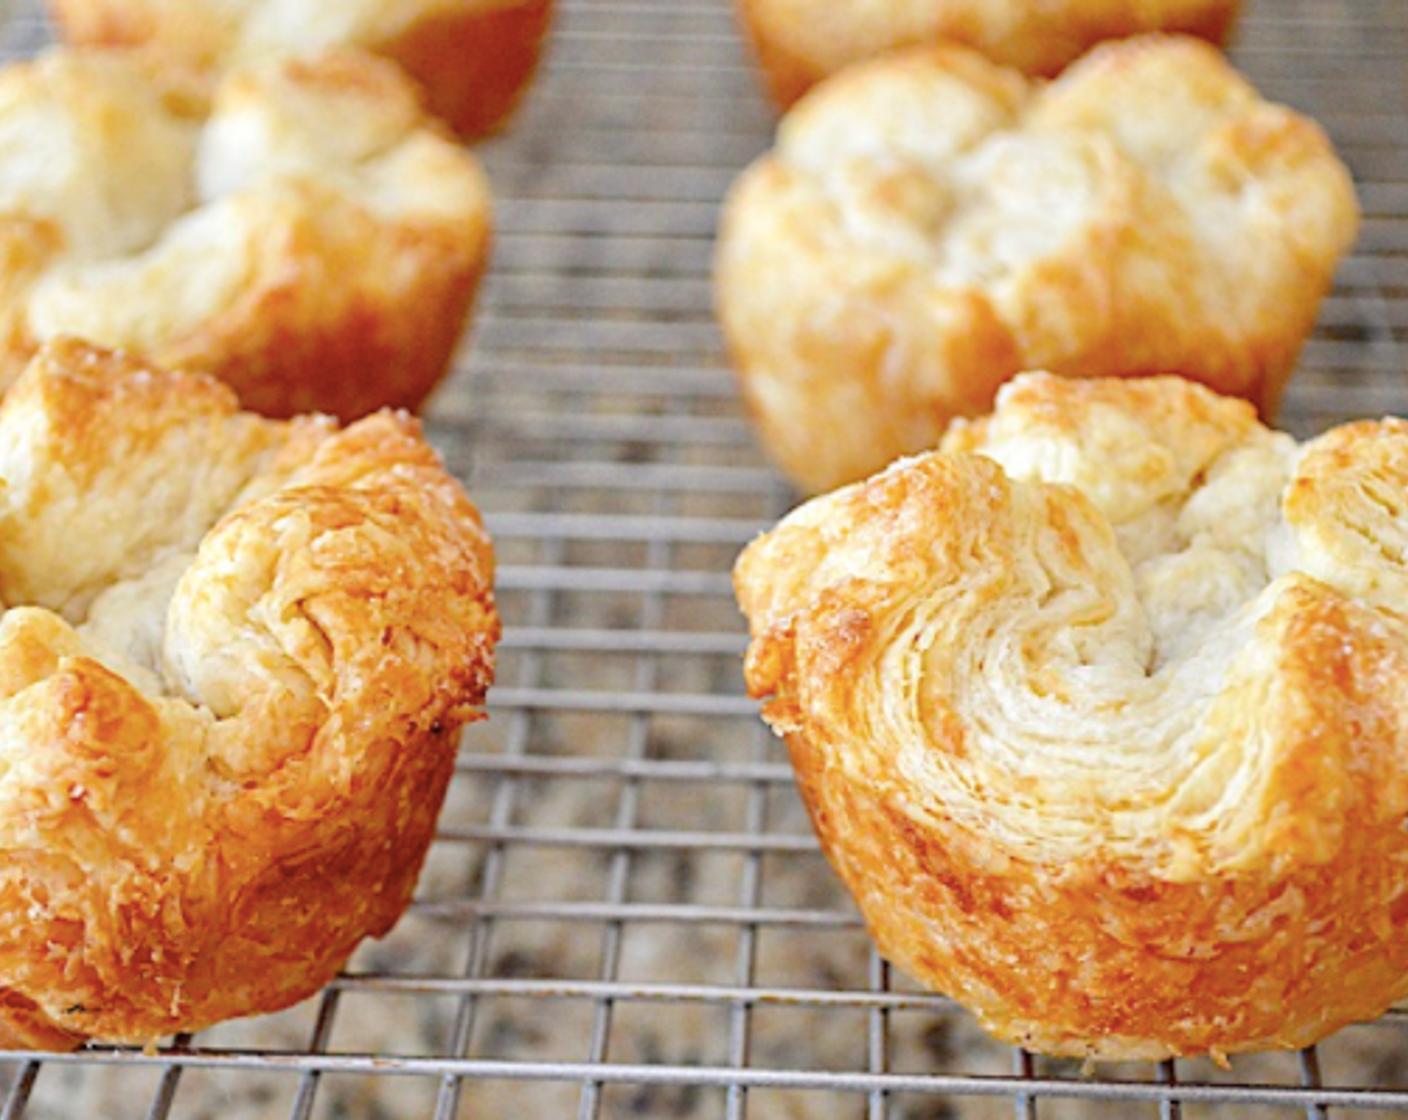 step 12 When they are done rising, preheat the oven to 350 degrees F (180 degrees C). Bake the kouign amann for 35-40 minutes, until they are completely flaky and golden.